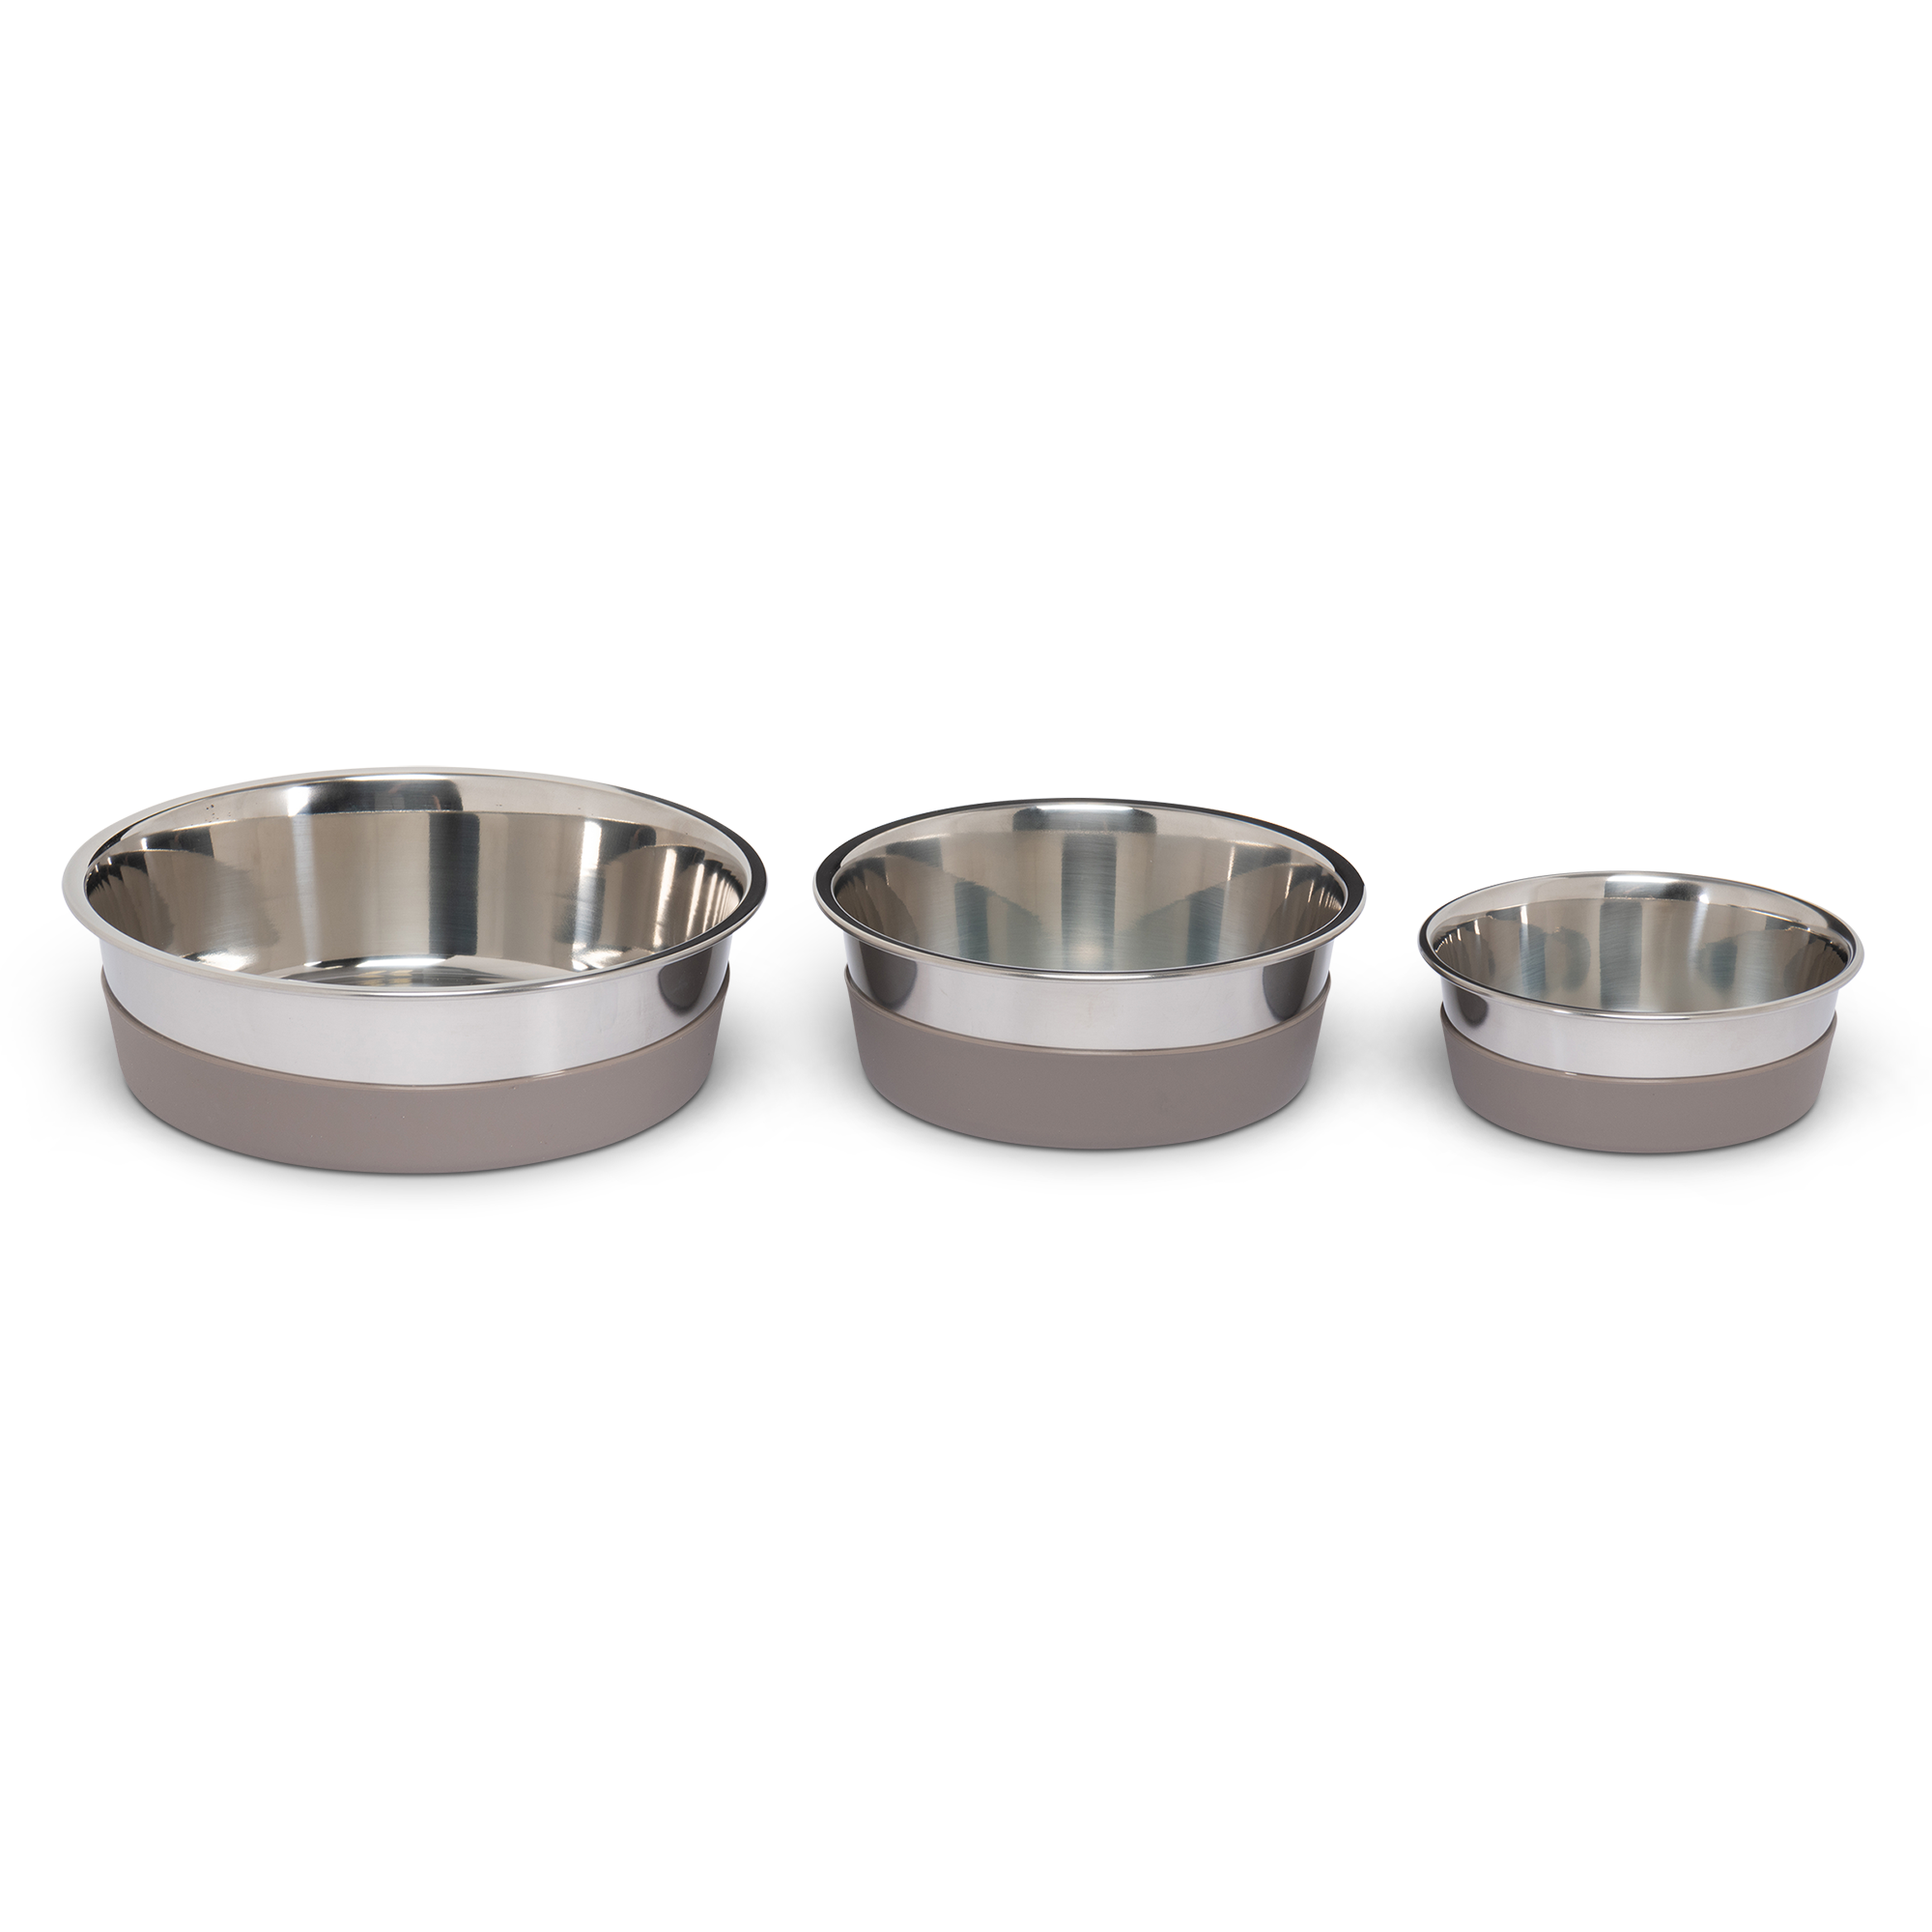 OurPets Stainless Steel No-Slip Bowl